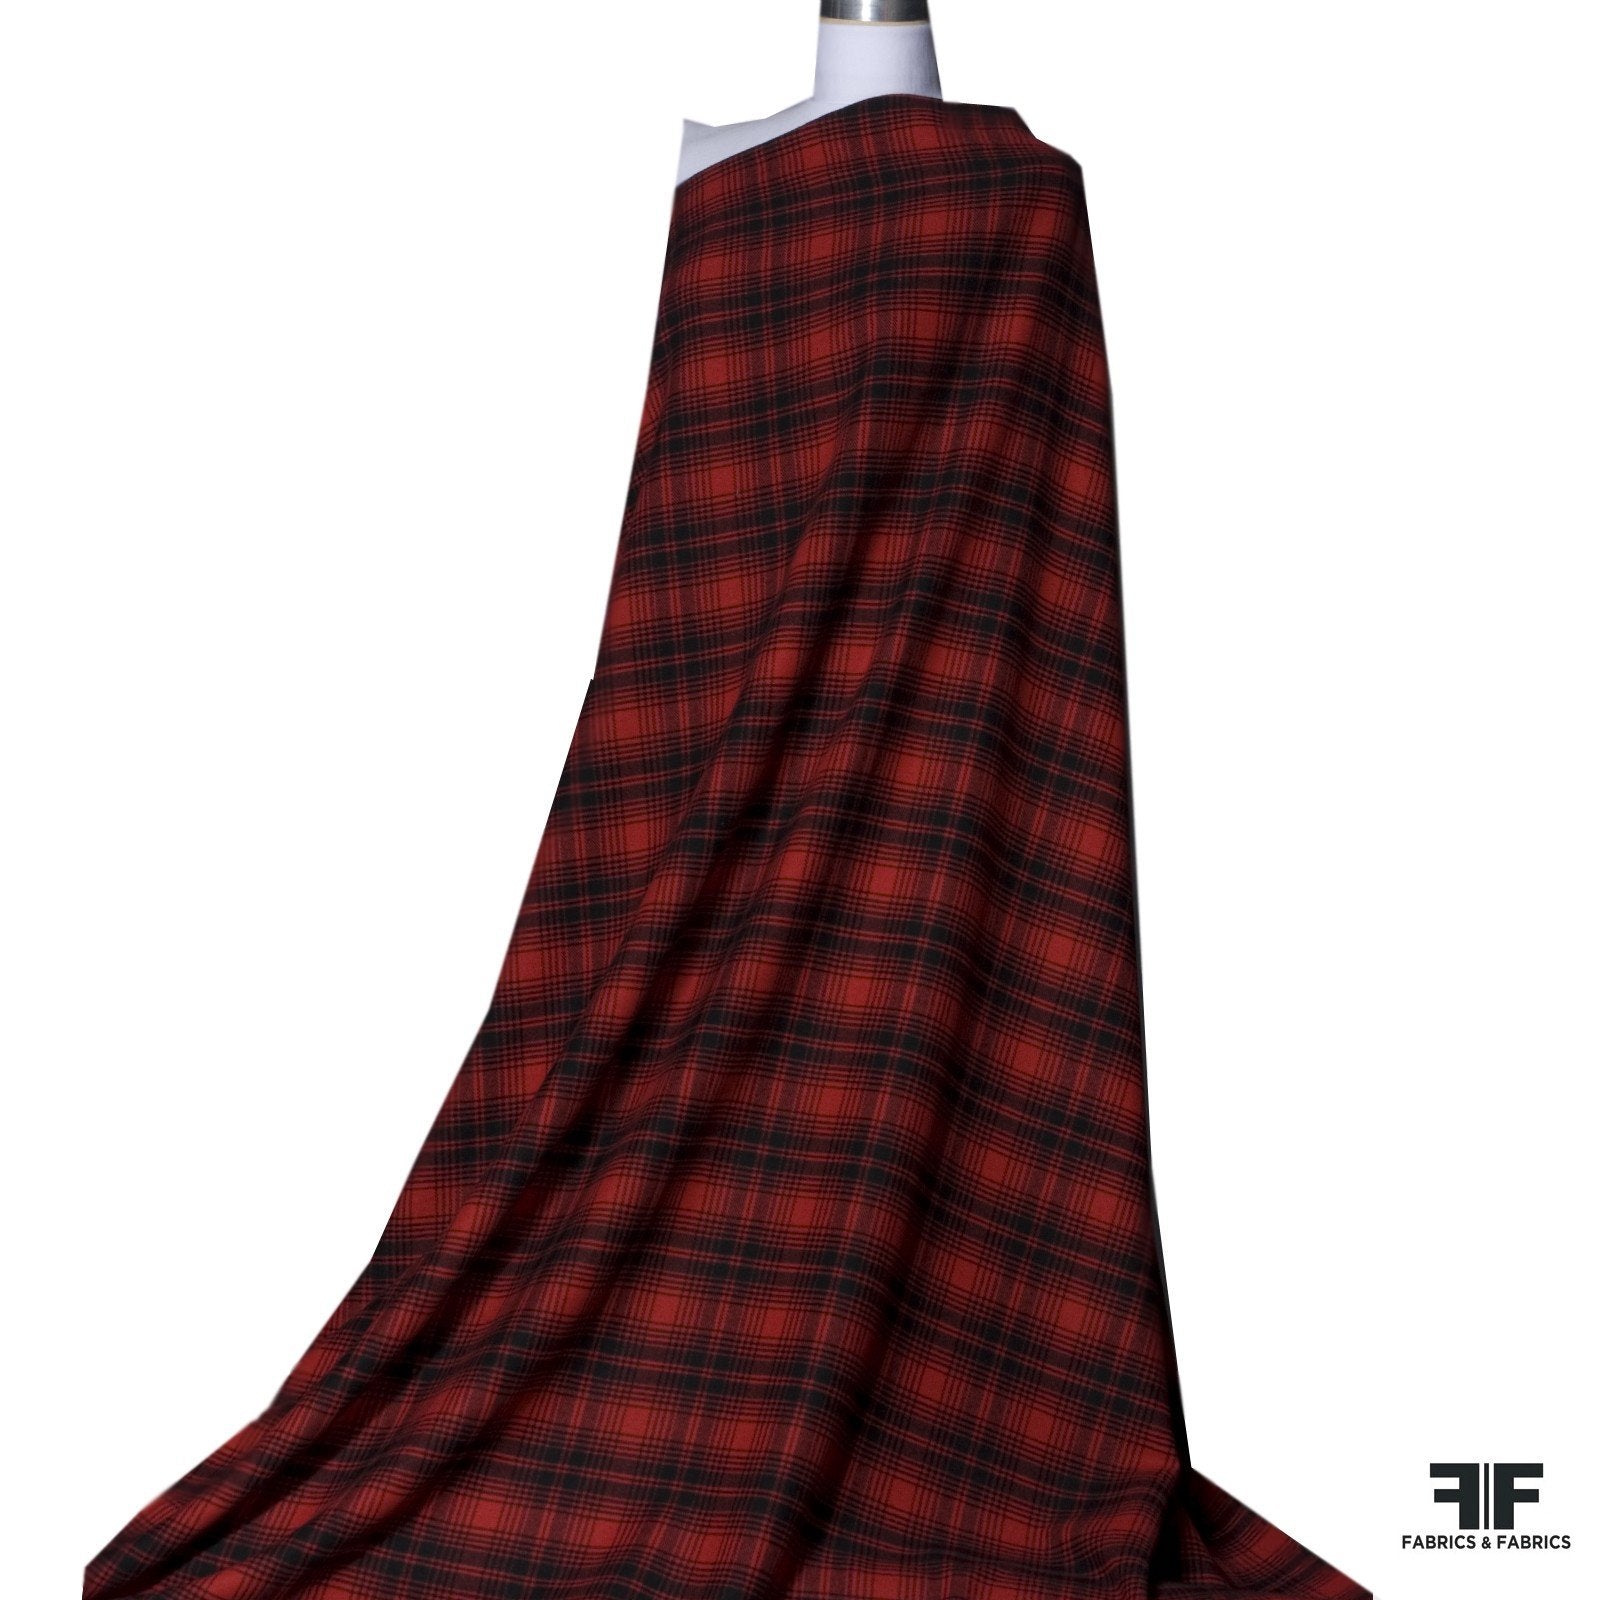 Plaid Double-Faced Wool/Cashmere Coating - Red/Black